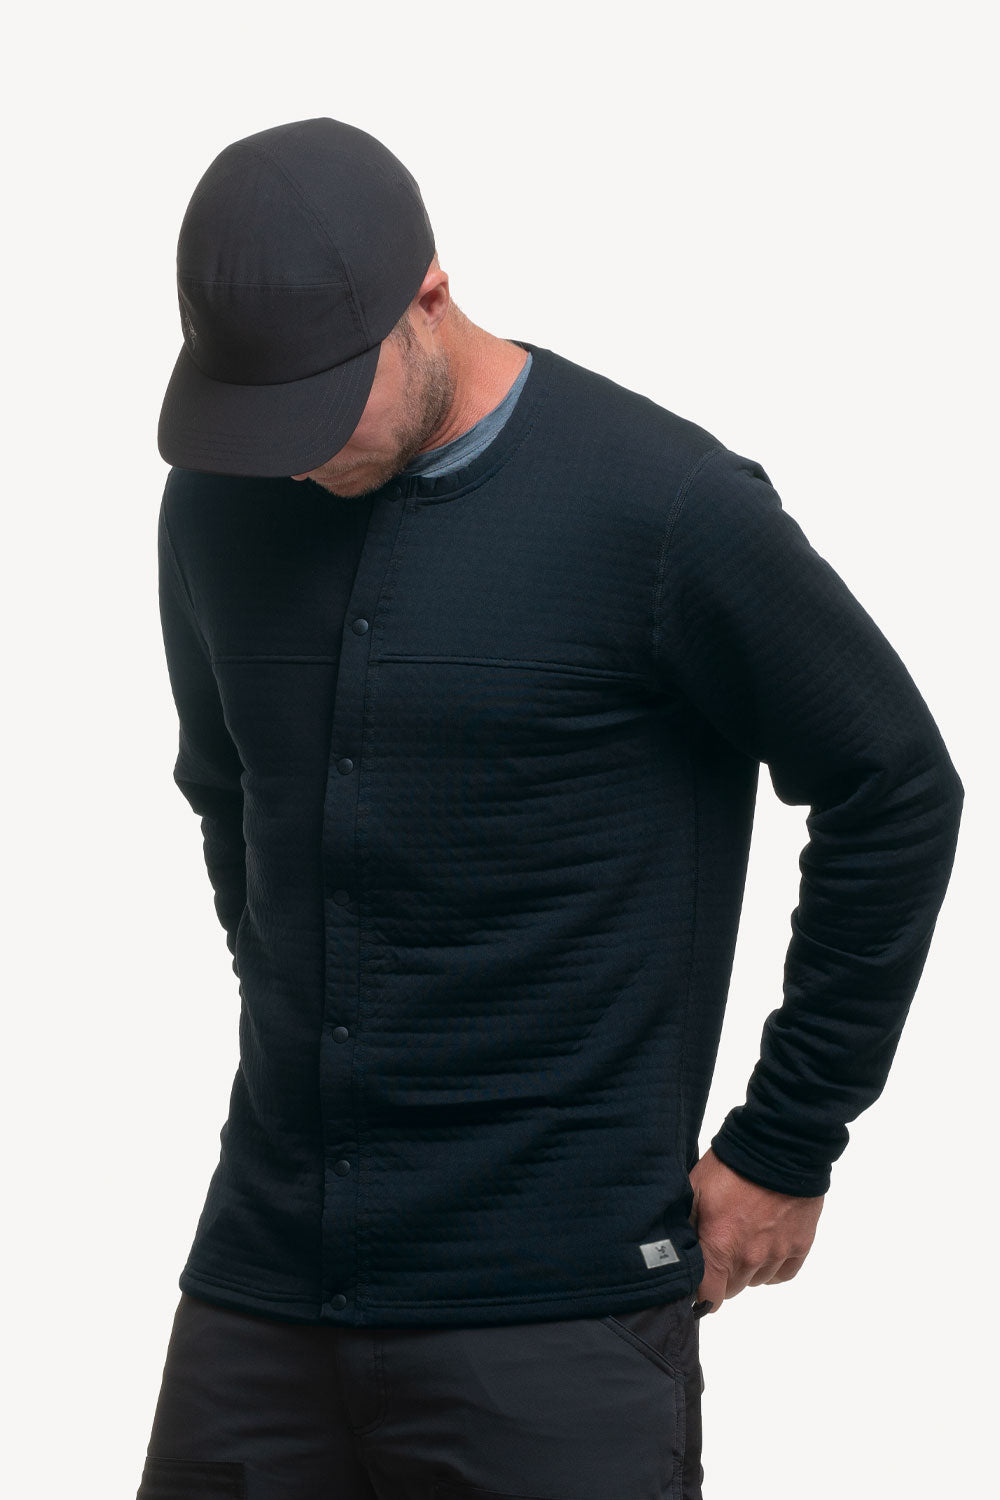 Men's all weather technical cardigan.